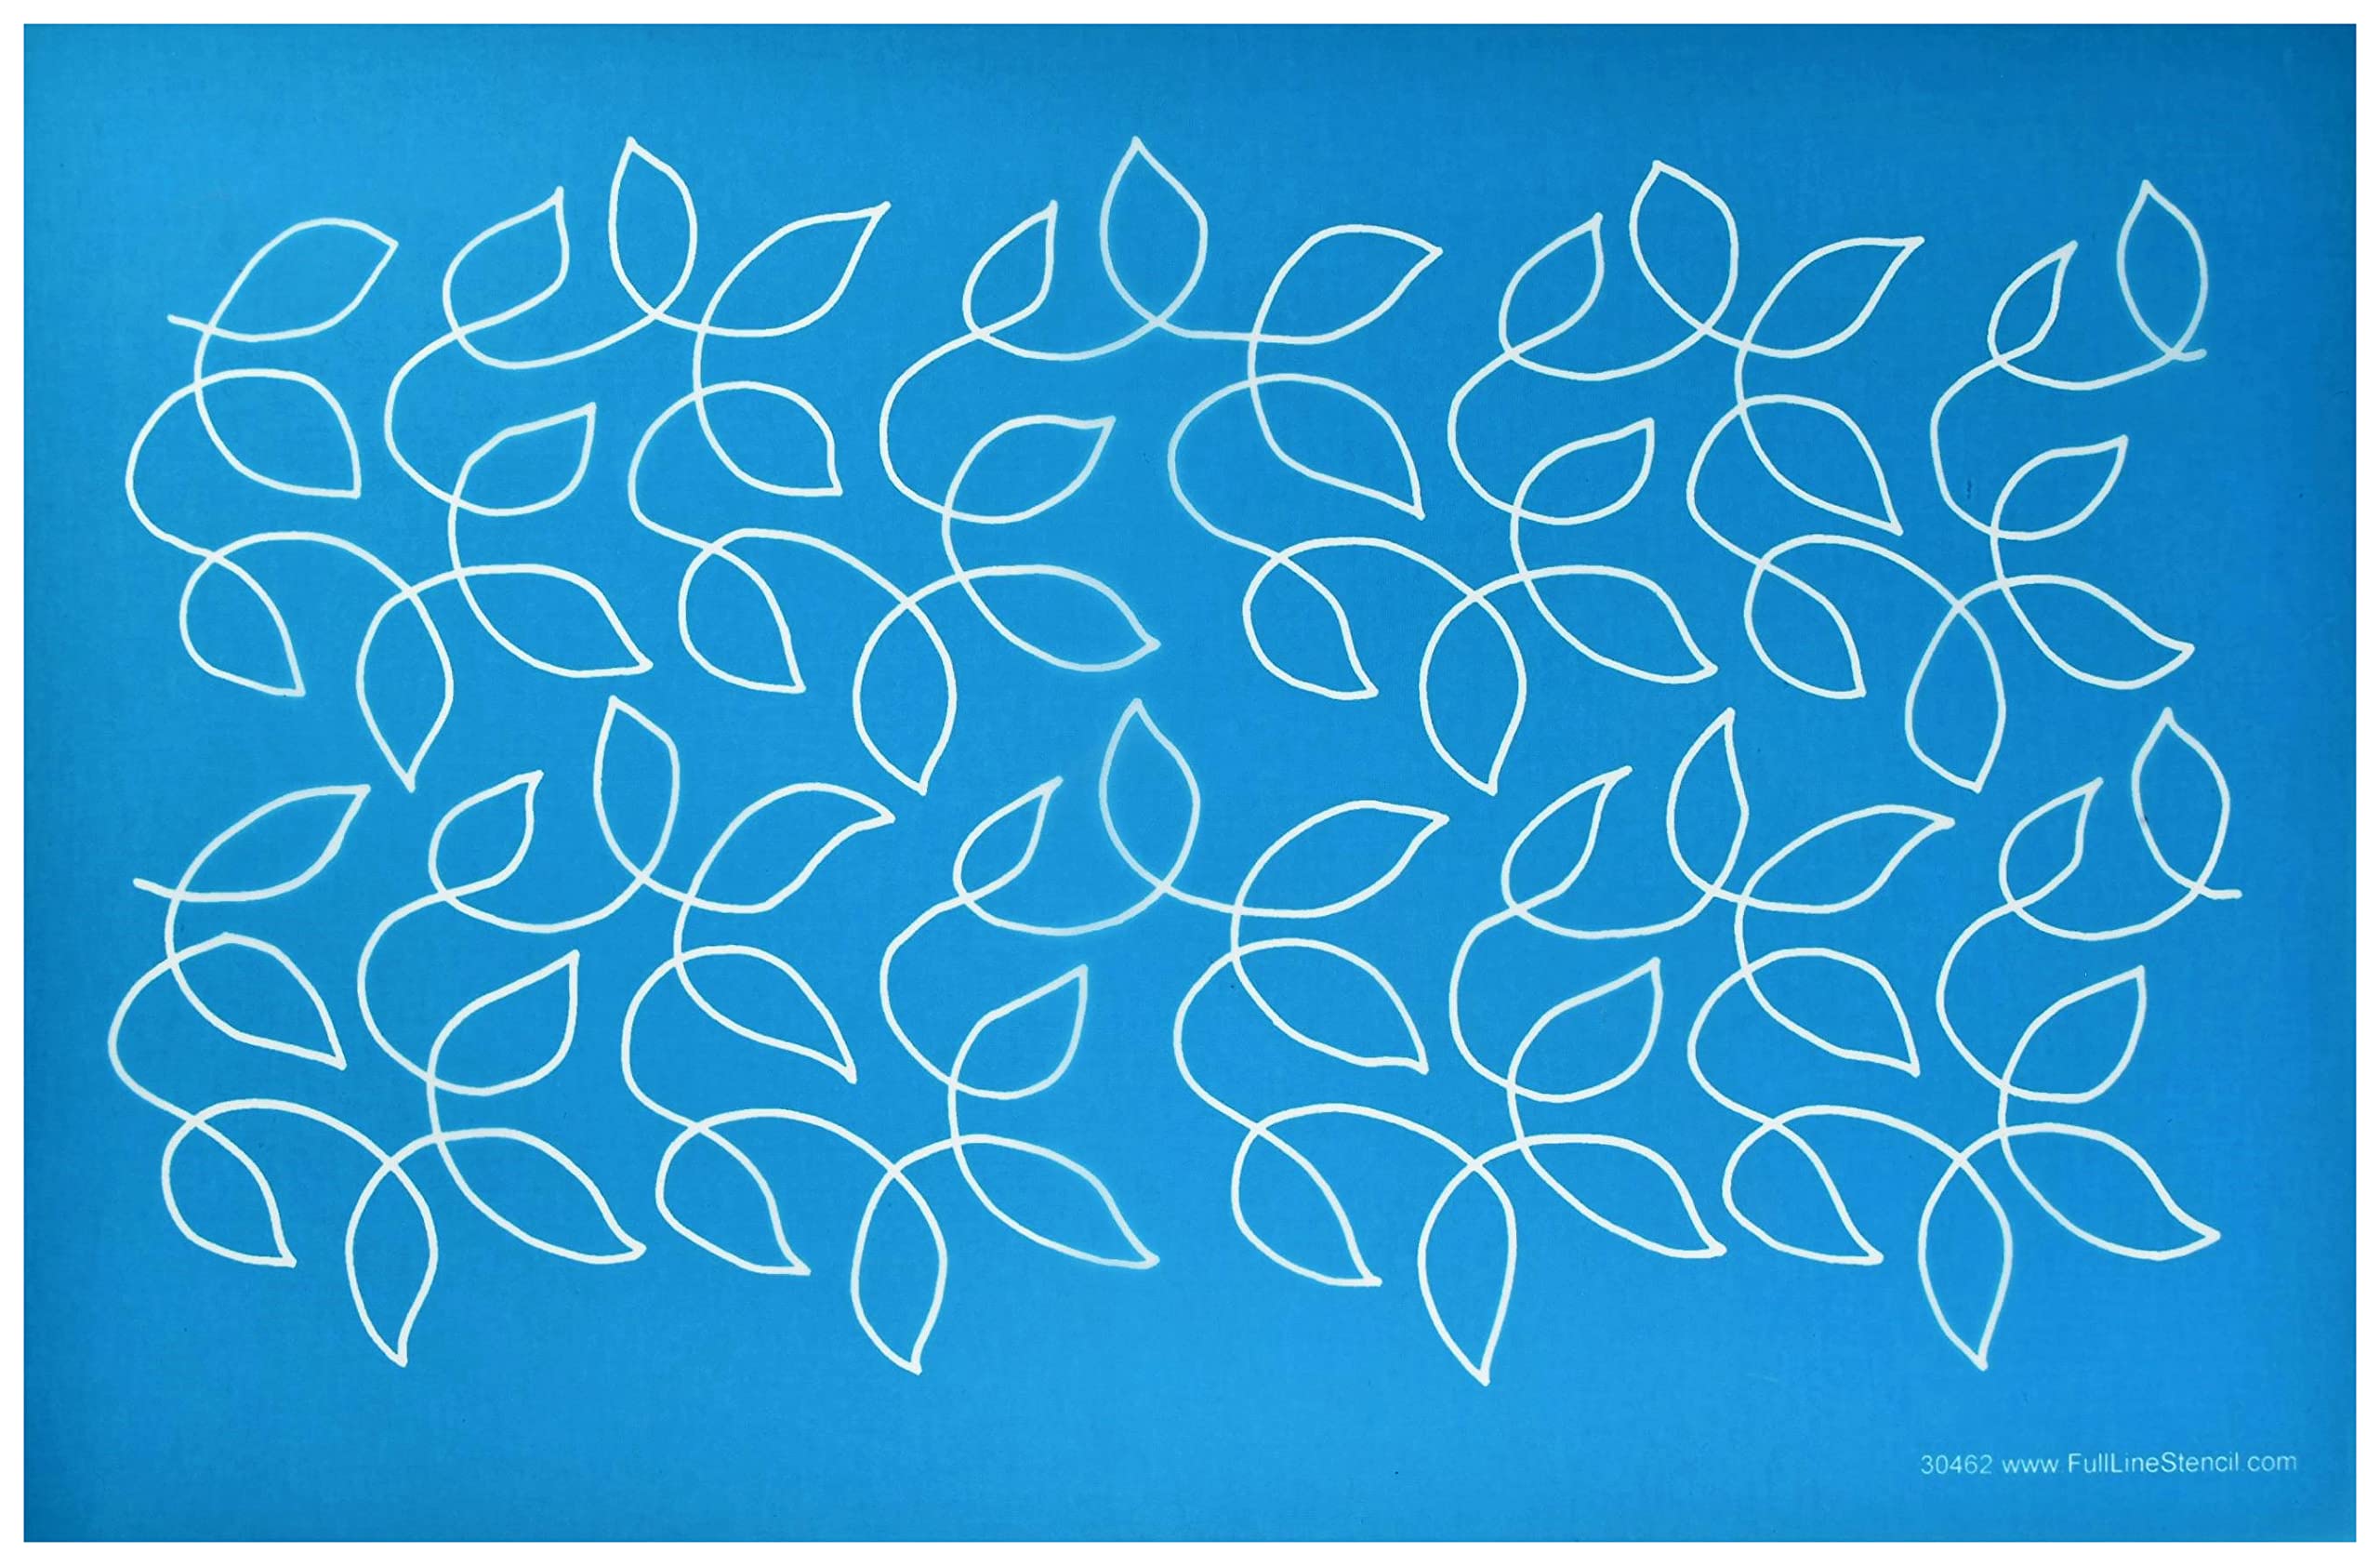 Full Line Stencil - Large Meandering Leaves- Edge to Edge Stencil  Continuous Line Template for Free Motion